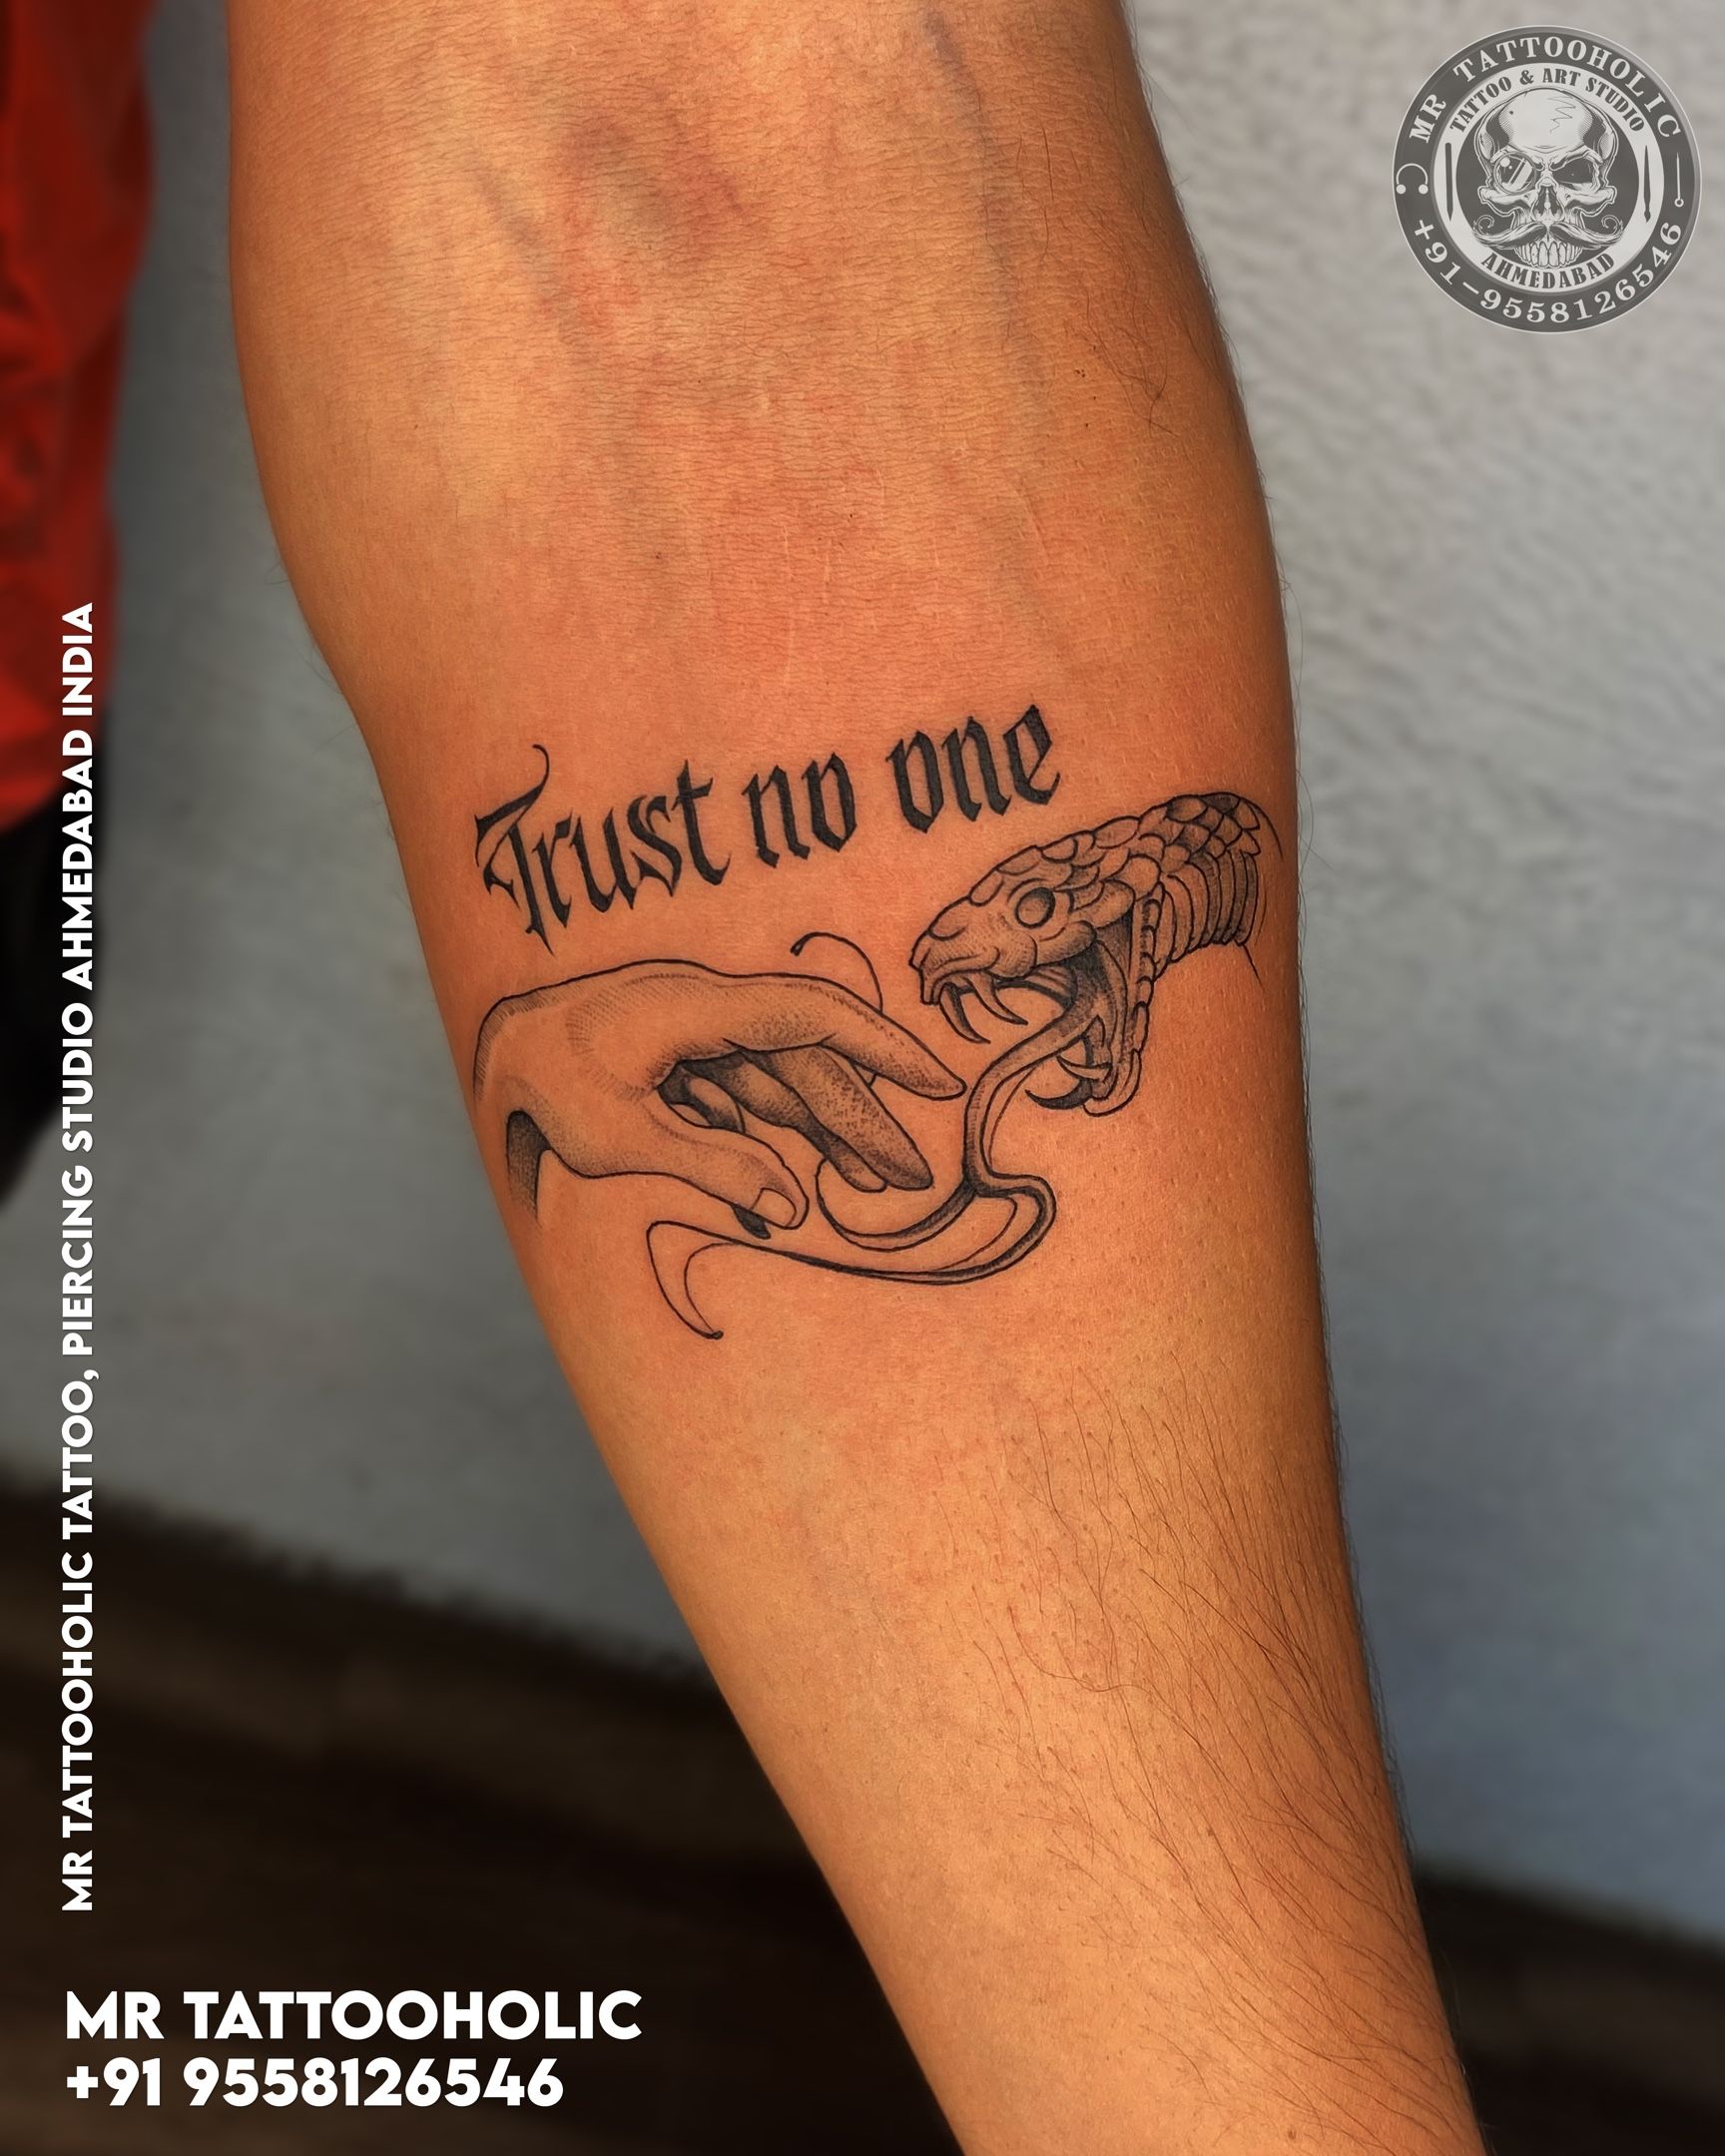 Trust No One Semi-Permanent Tattoo. Lasts 1-2 weeks. Painless and easy to  apply. Organic ink. Browse more or create your own. | Inkbox™ |  Semi-Permanent Tattoos